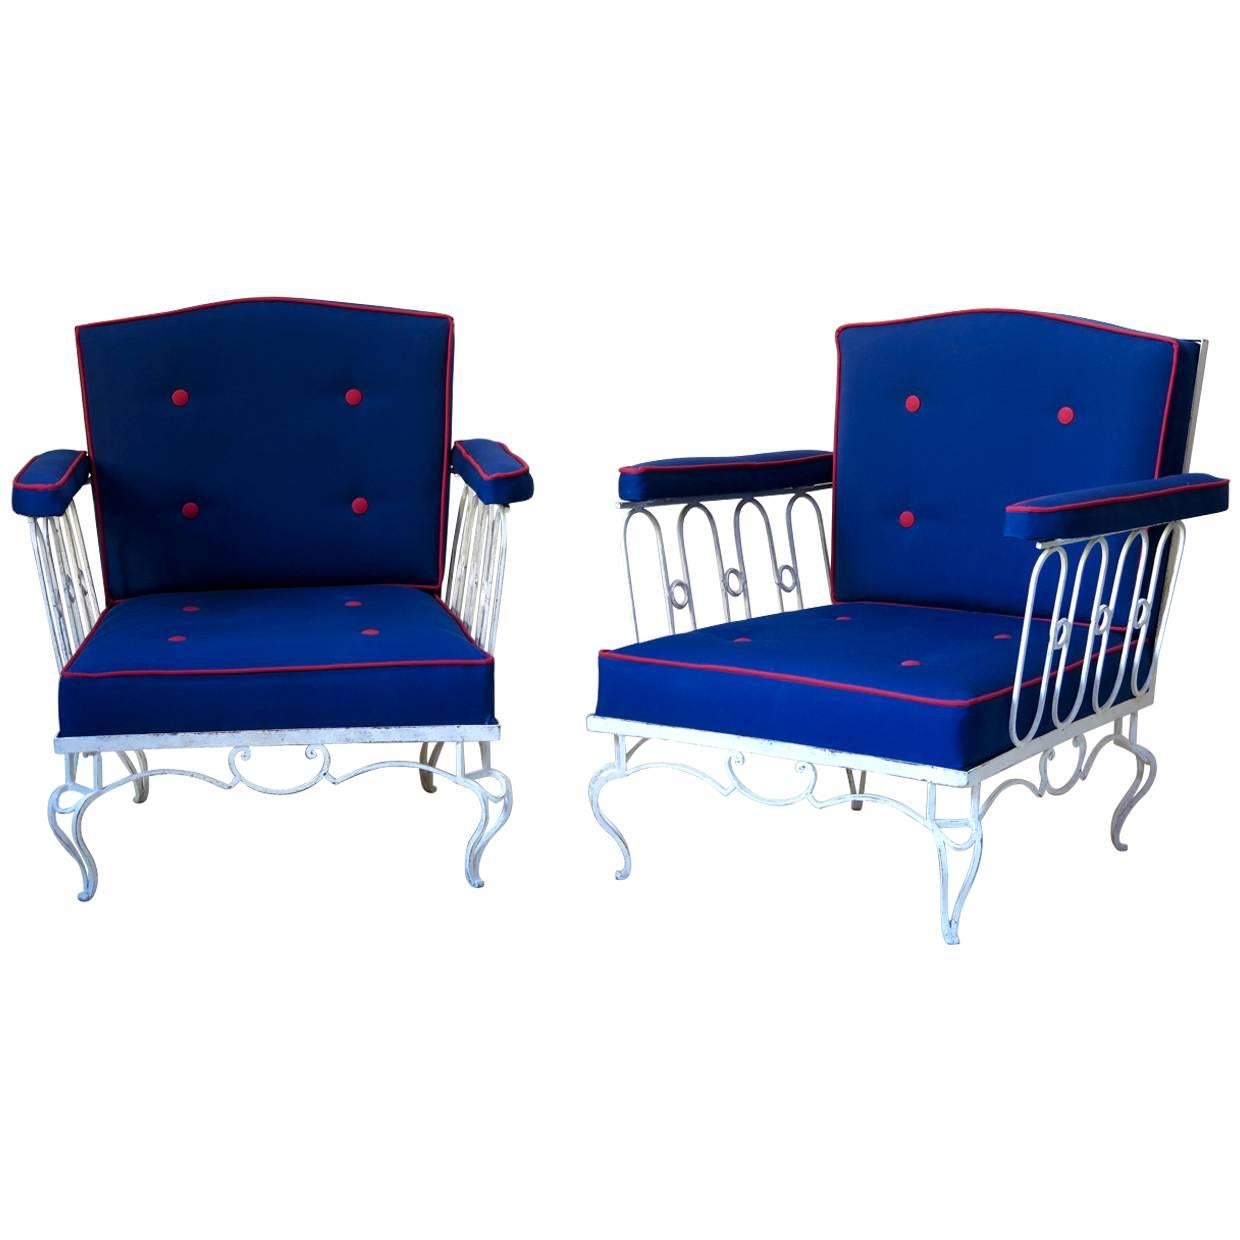 Pair of Art Deco Armchairs, France, 1940s